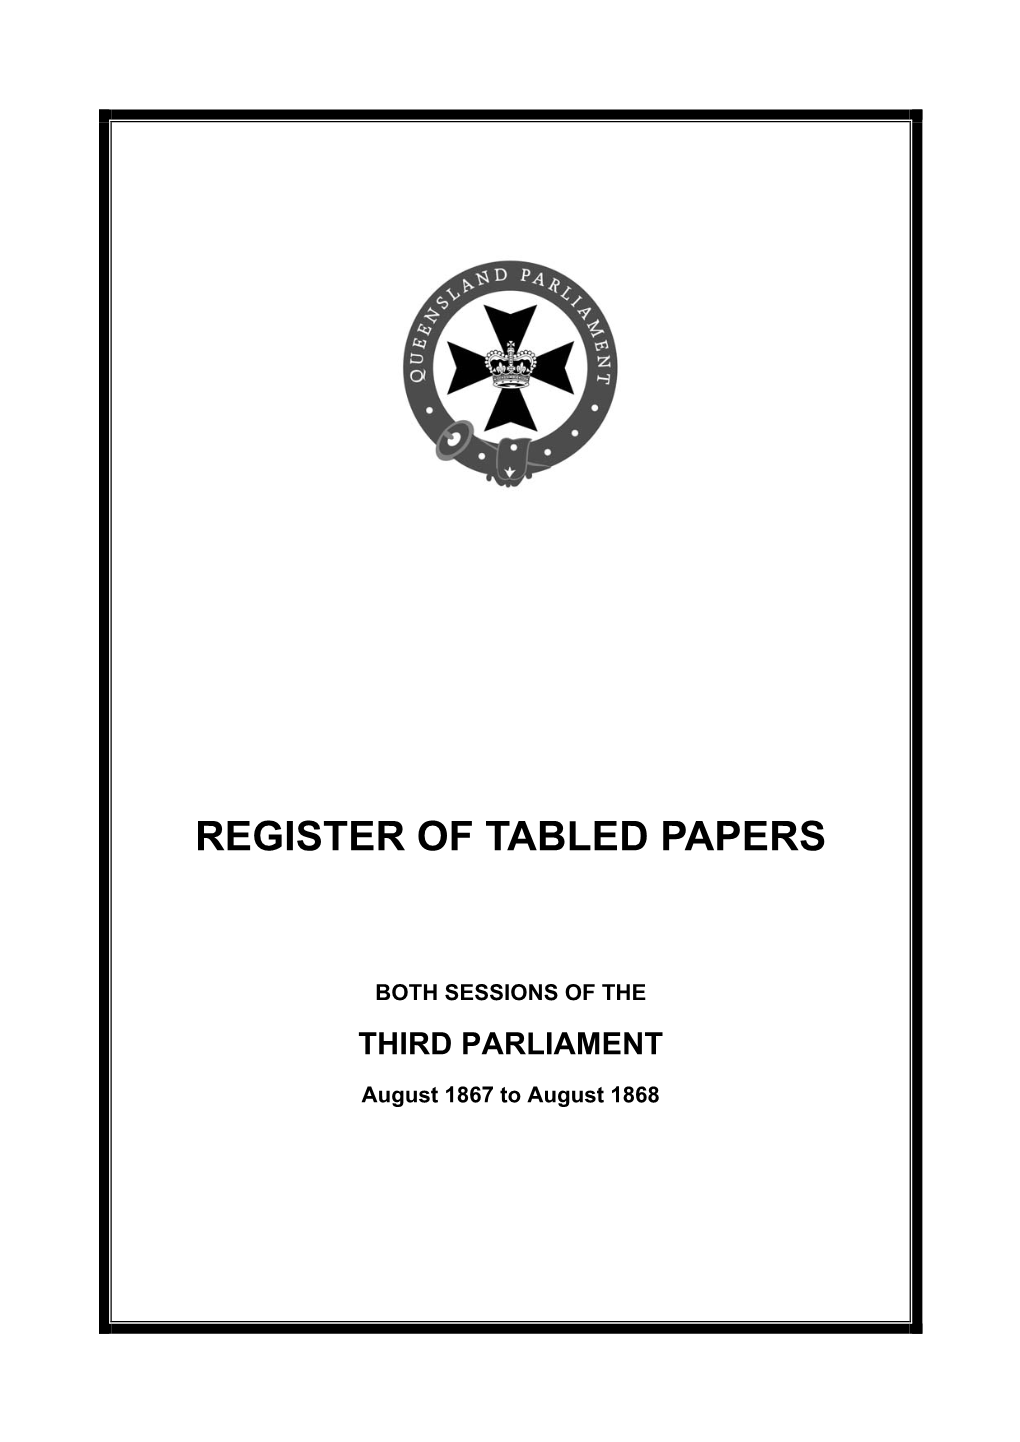 Register of Tabled Papers